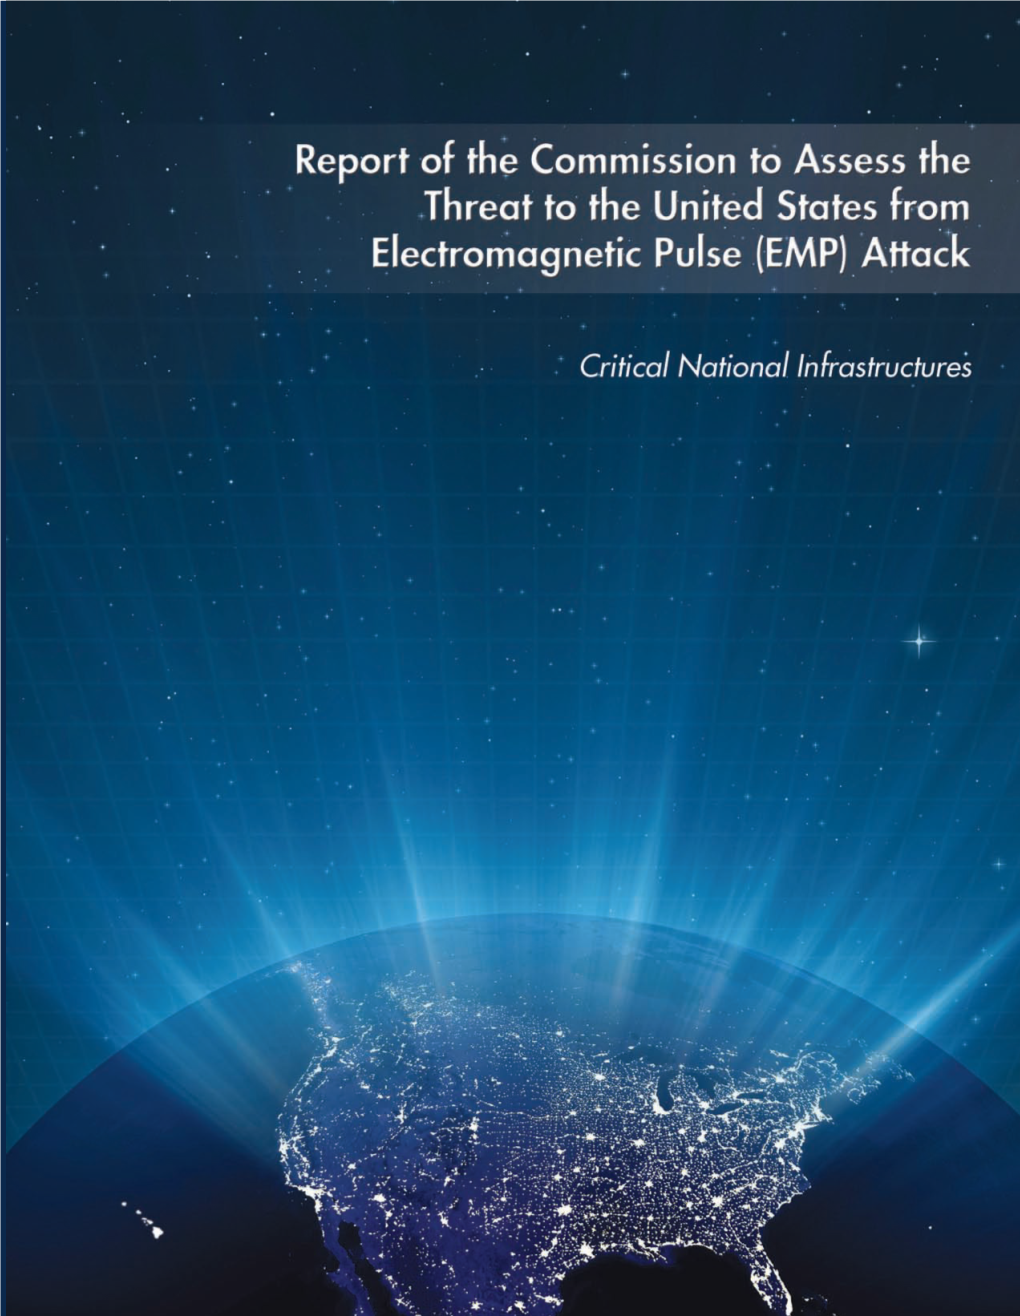 Report of the Commission to Assess the Threat to the United States